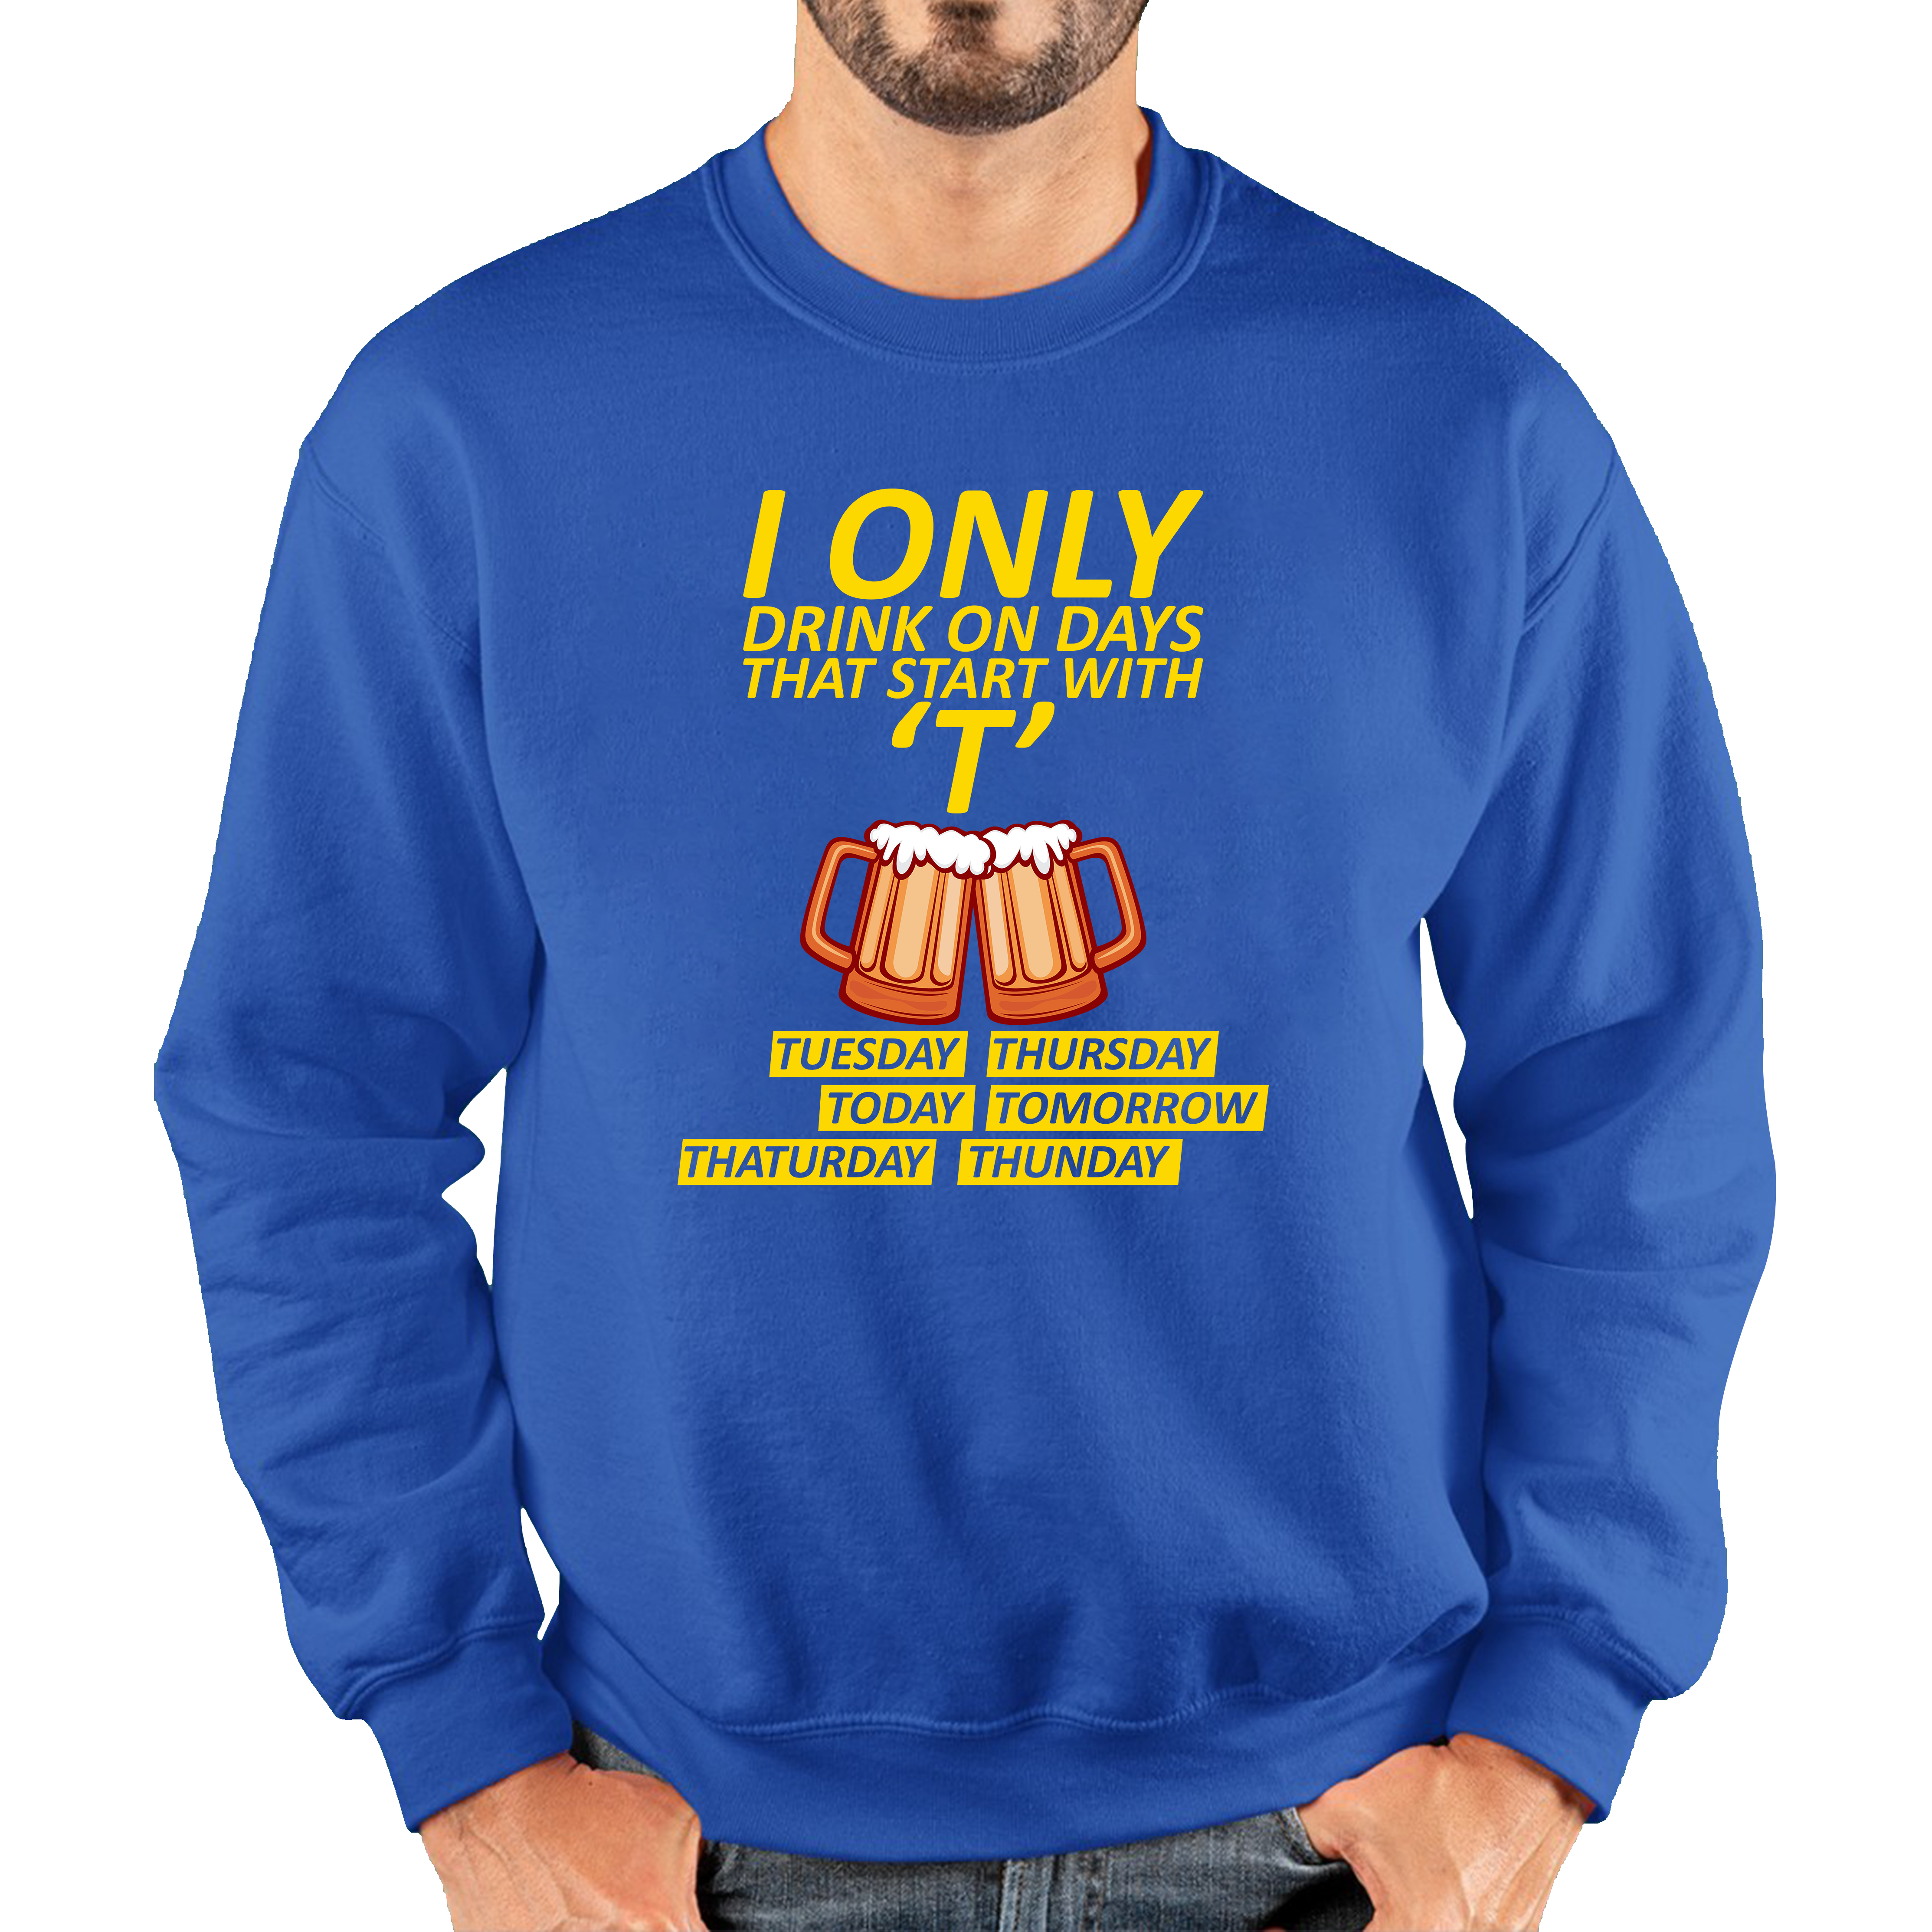 I Only Drink On Days That Start With T, Tuesday, Thursday, Today, Tomorrow, Thaturday, Thunday Adult Sweatshirt